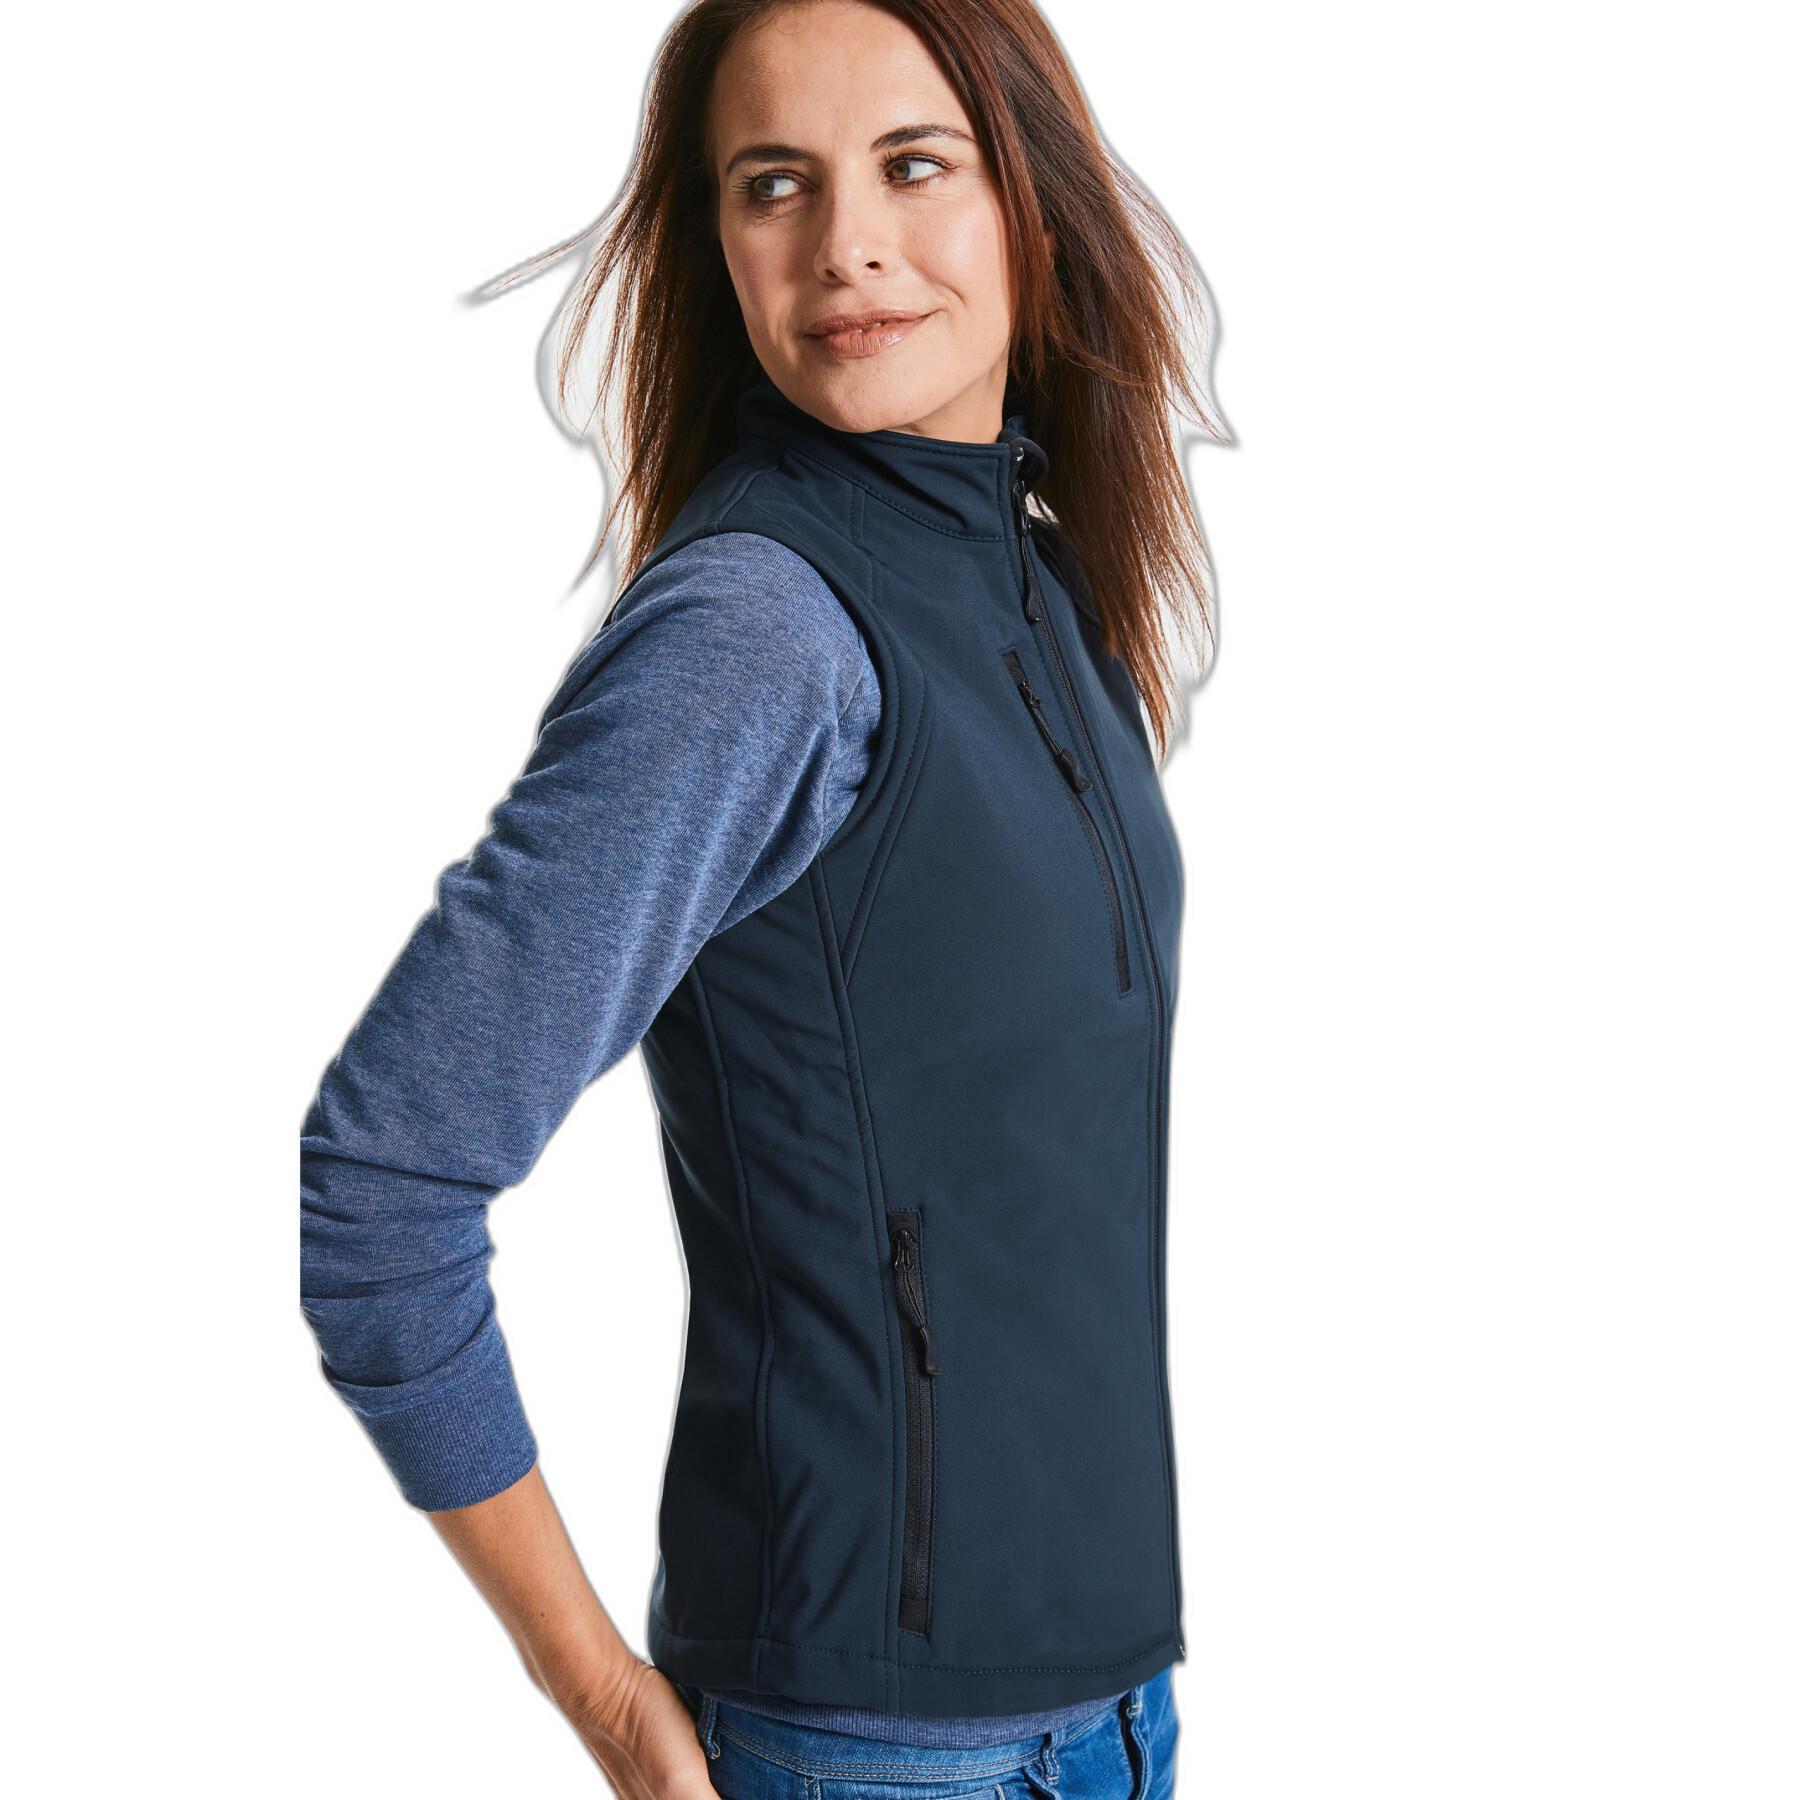 Giacca impermeabile da donna Russell Softshell